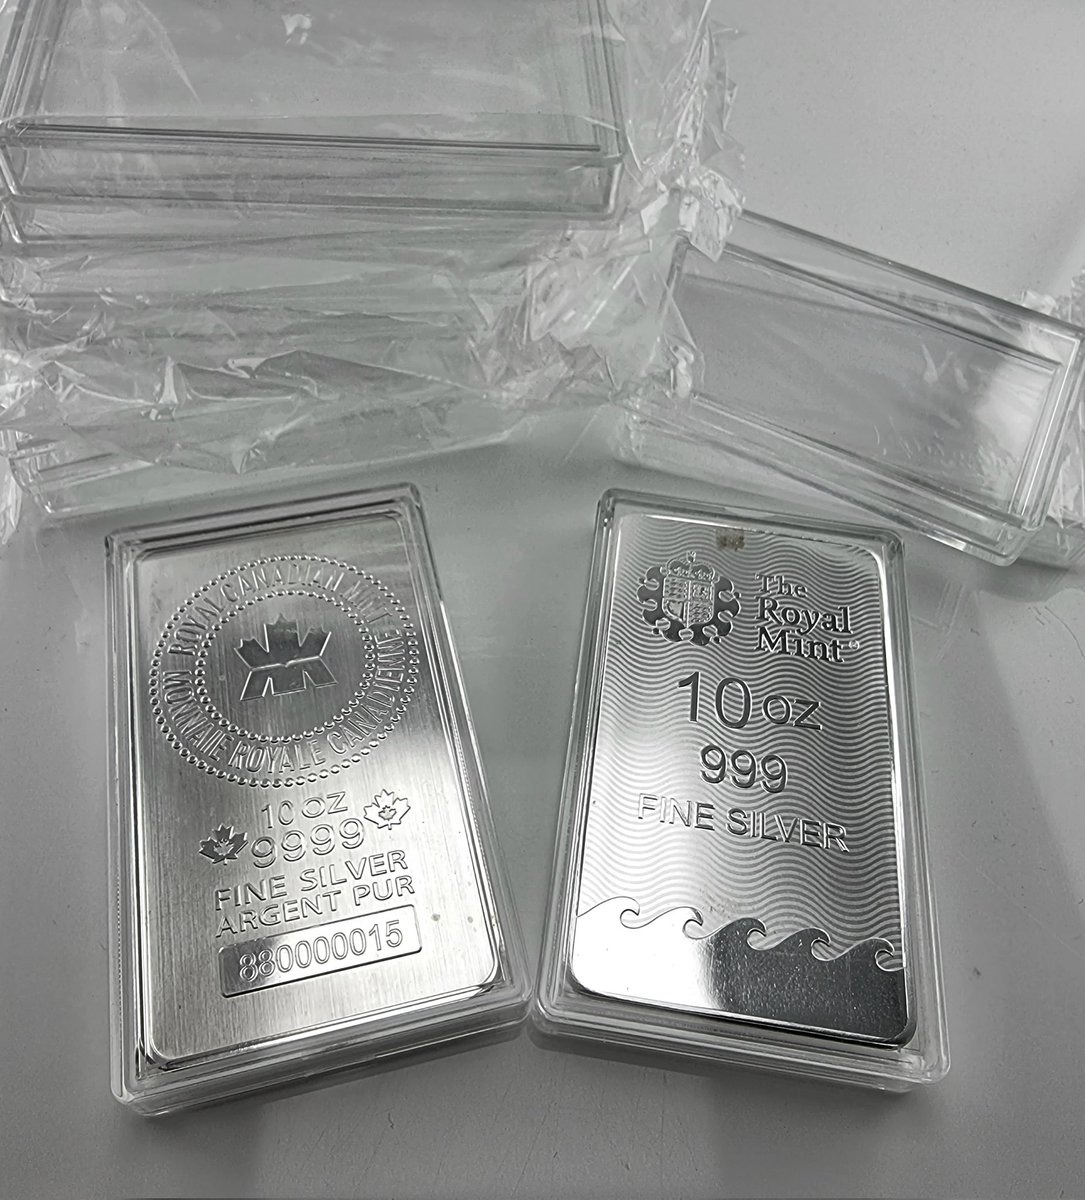 I just received capsules for 10oz bars that I ordered from China. My 10oz #Silver bars look even more amazing now. And I have enough empty capsules to grow my collection 😁👍🏻🦍 

Happy weekend everyone 😀

#silversqueeze #Silber #investing #inflation #stocks #silverbar #silver